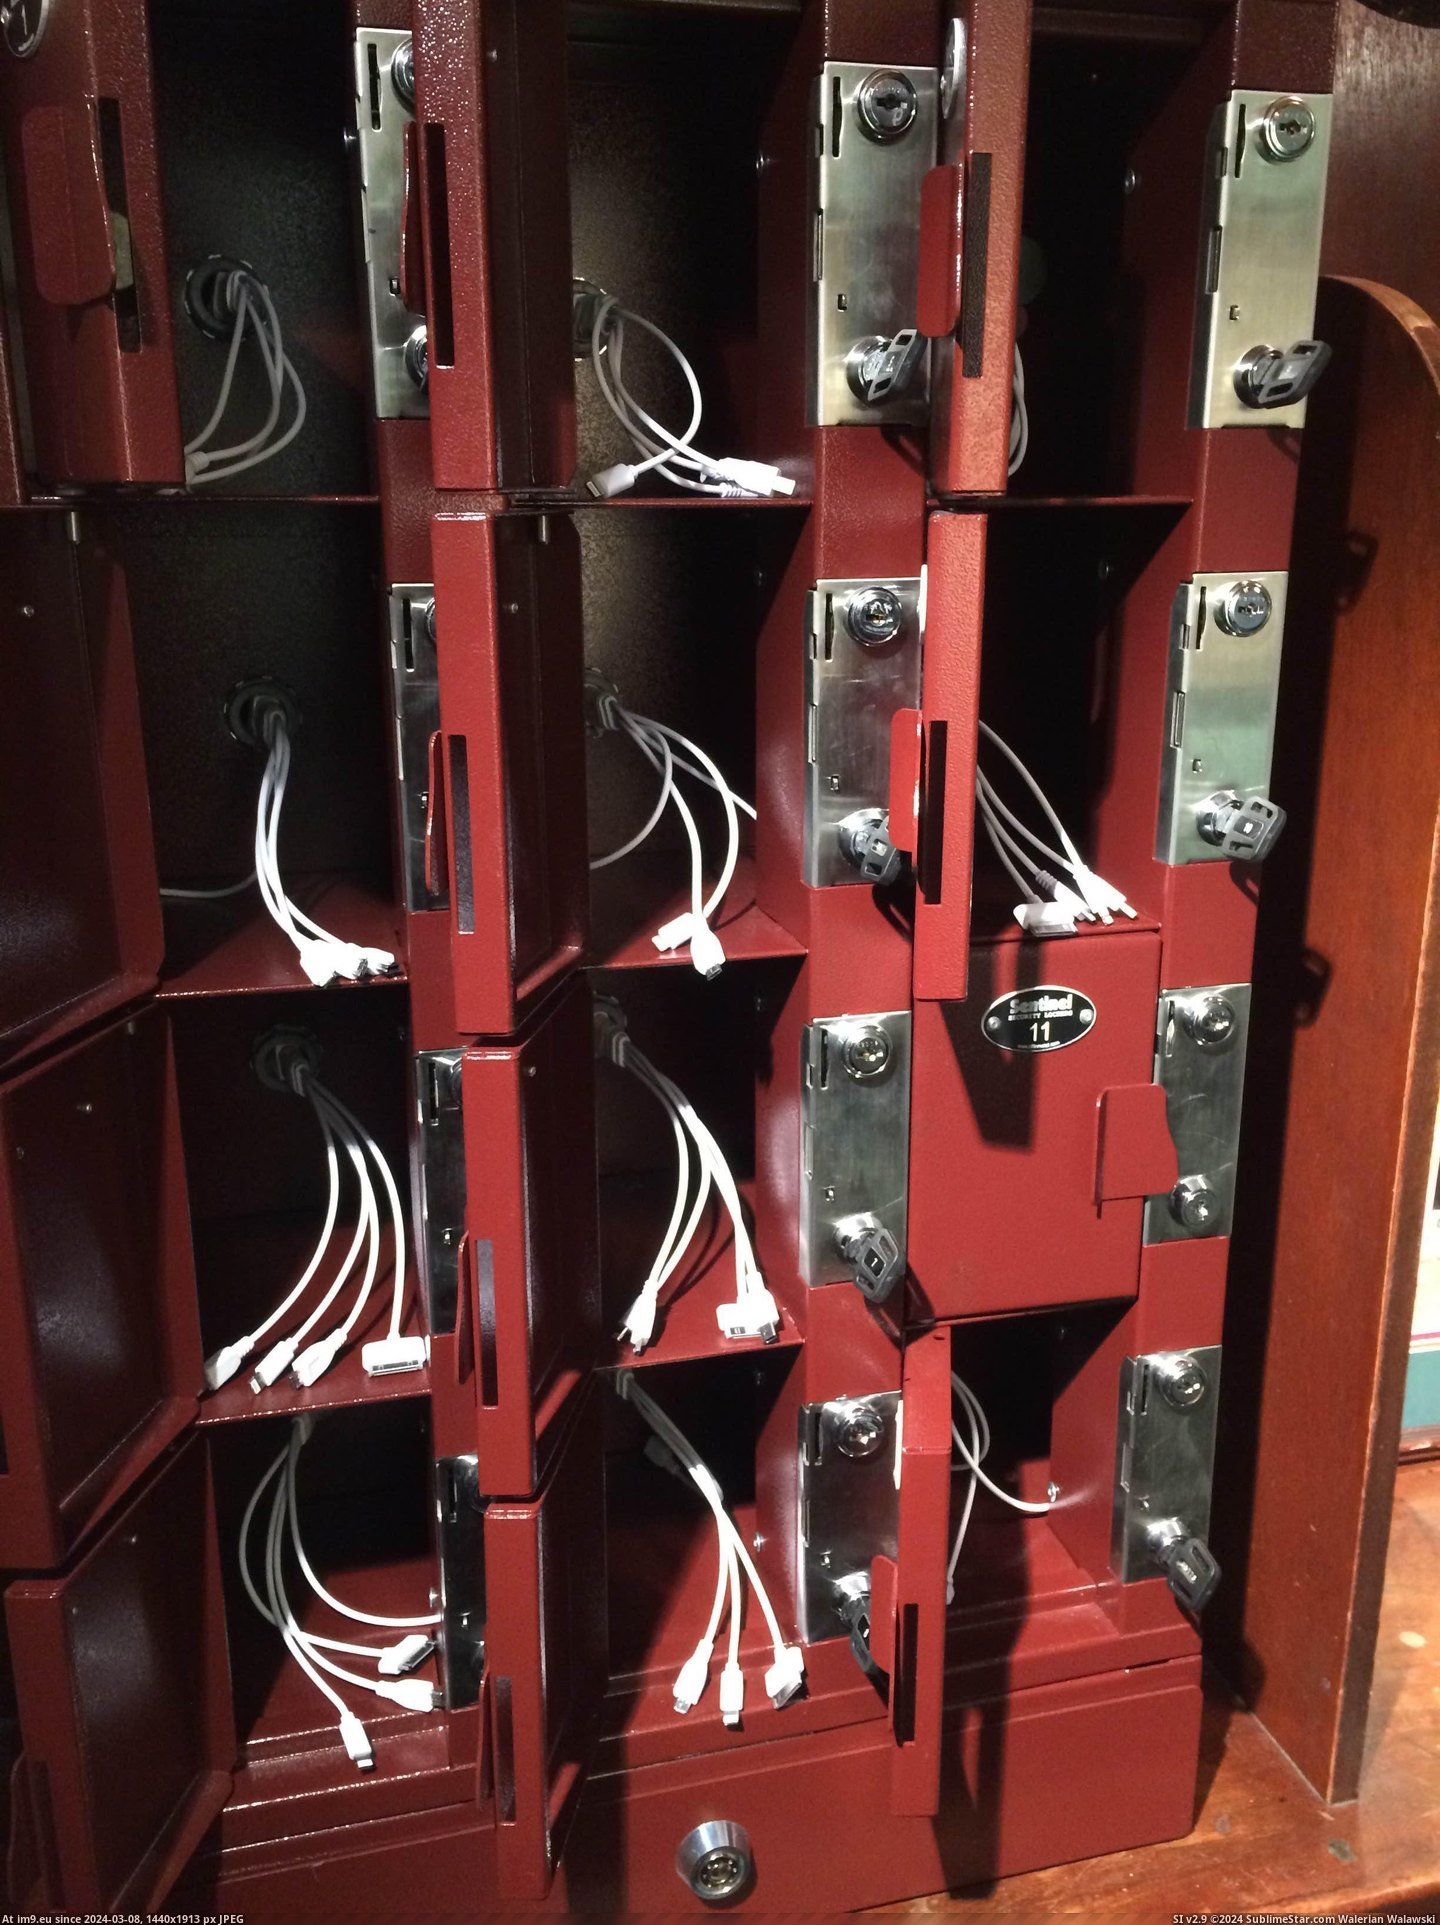 #Local #Store #Phone #Rent #Charges #Area #Bar #Locker [Mildlyinteresting] A local bar has an area where you can rent a locker to store your phone while it charges Pic. (Изображение из альбом My r/MILDLYINTERESTING favs))